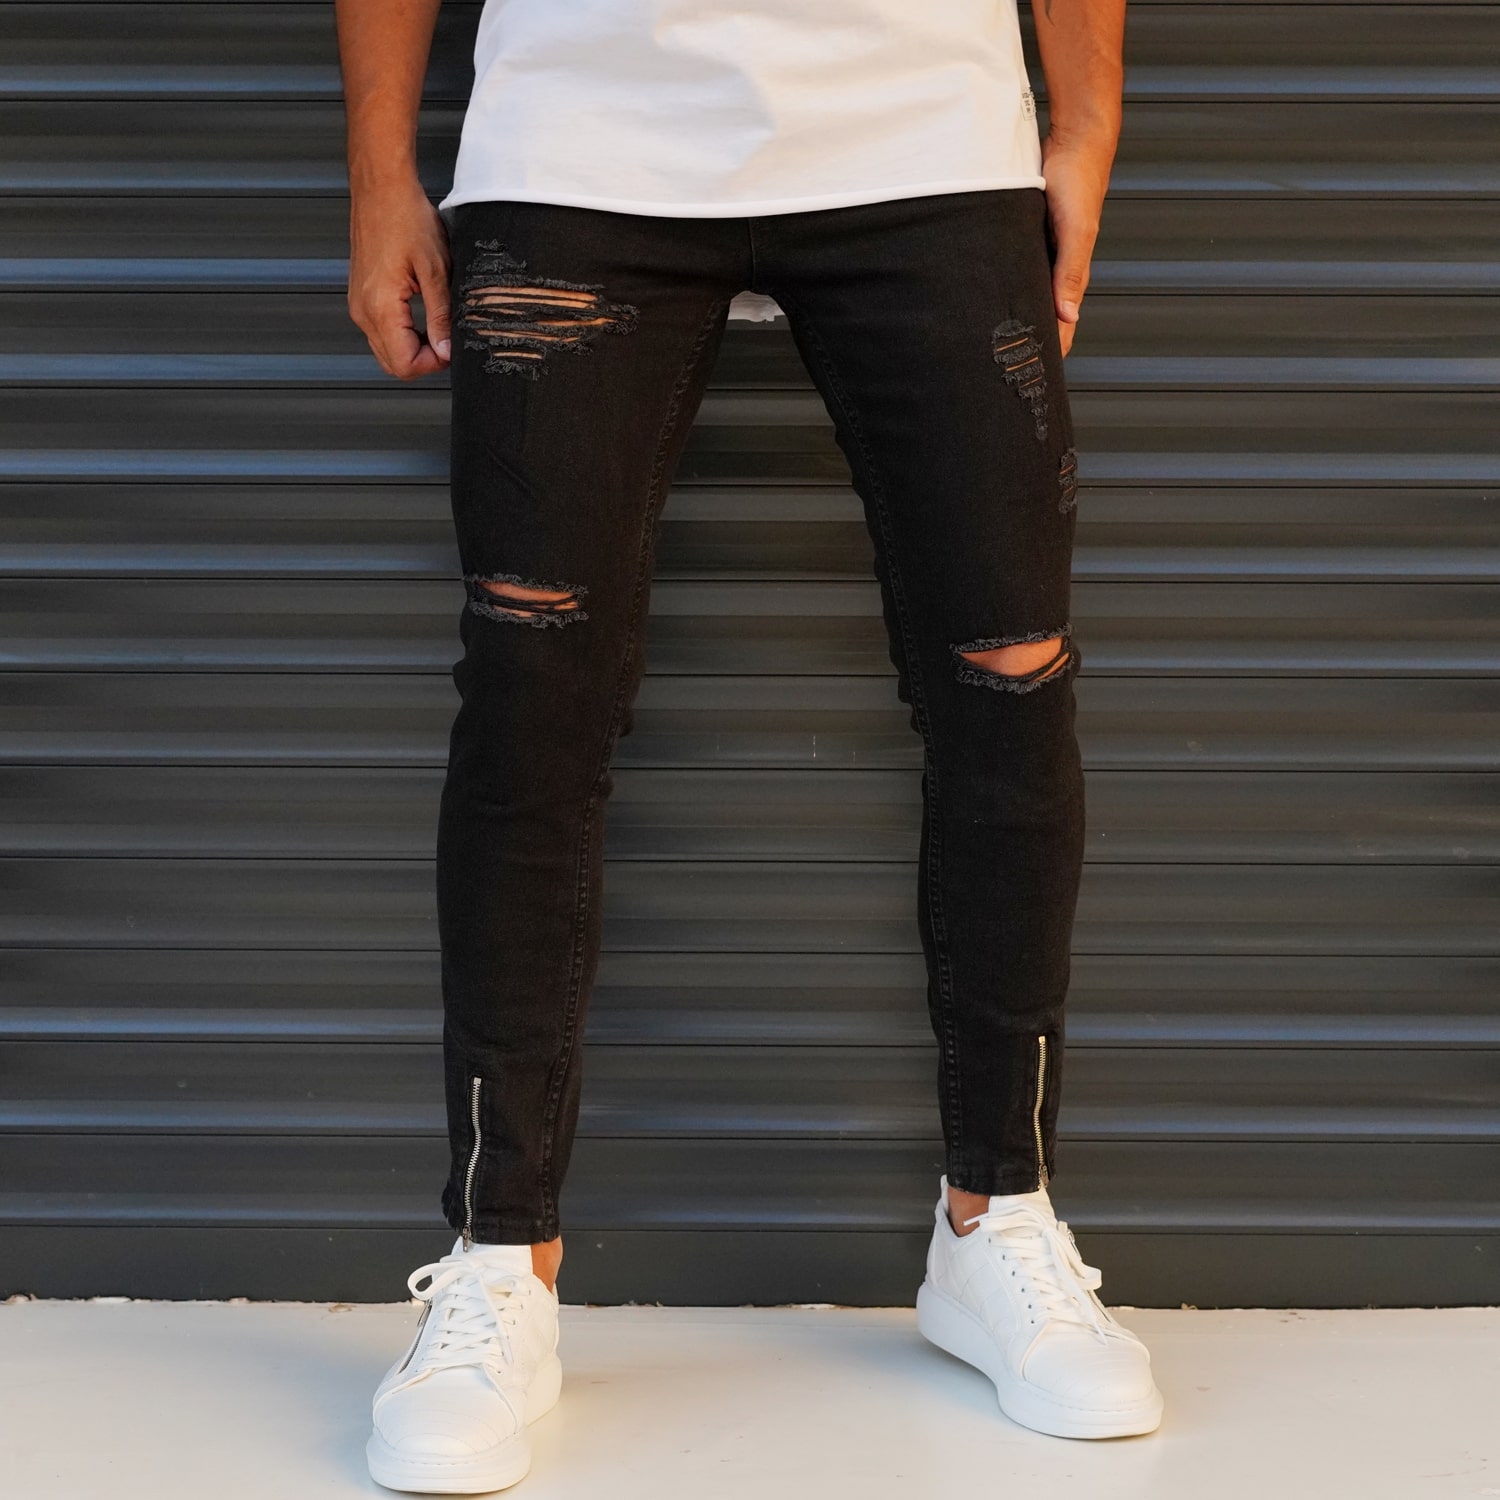 Men's Jeans With Rips In Black